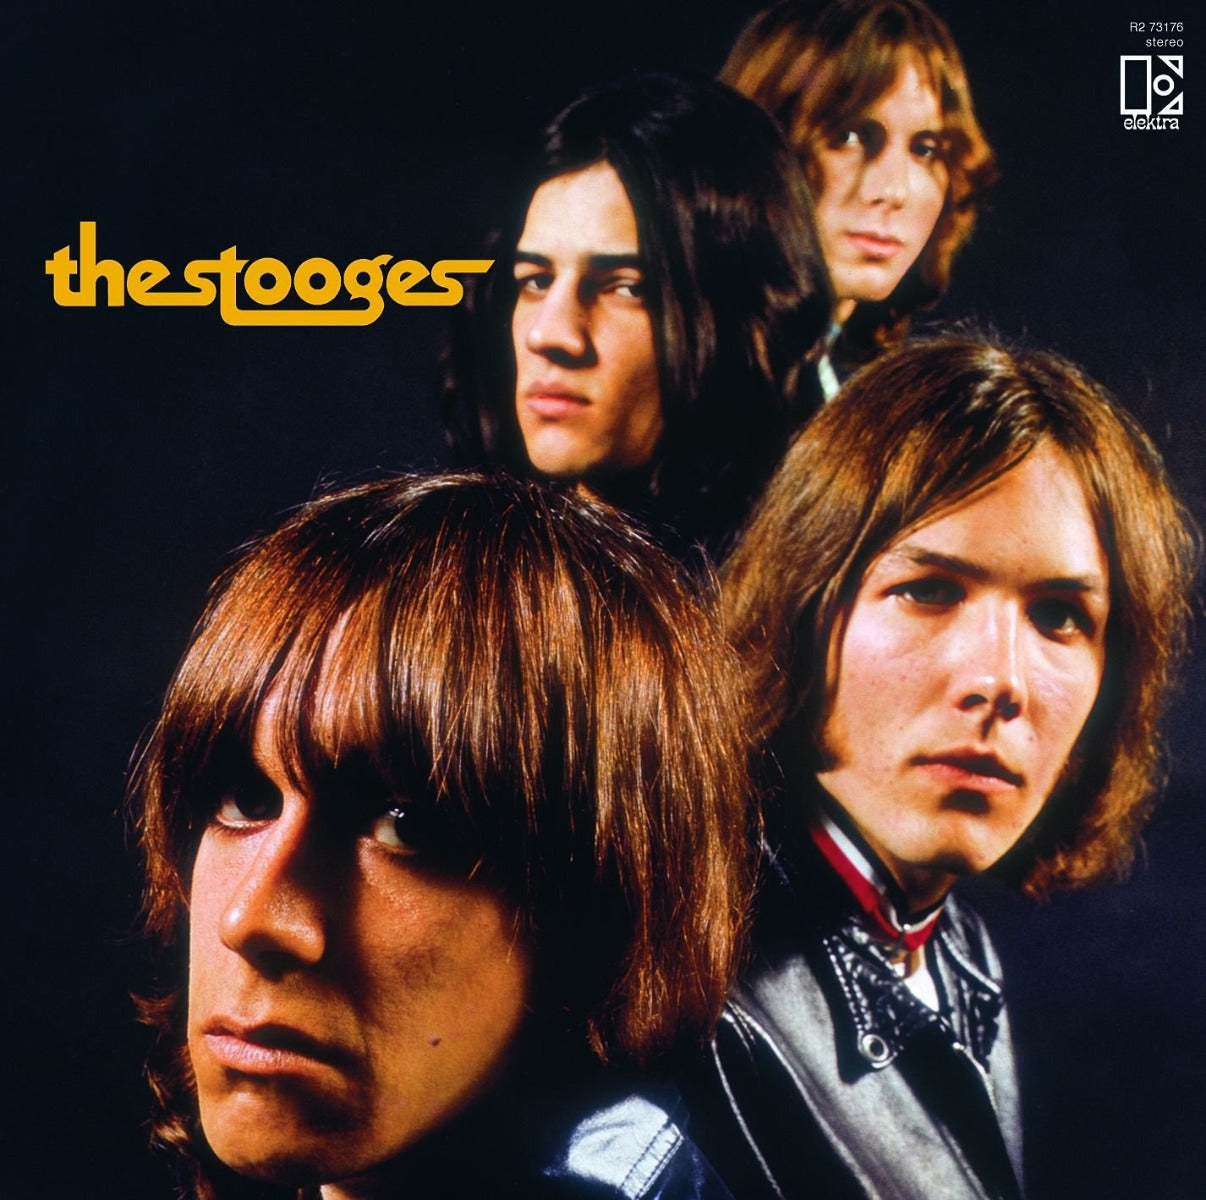 The Stooges | The Stooges (Limited Edition, Colored Vinyl) | Vinyl